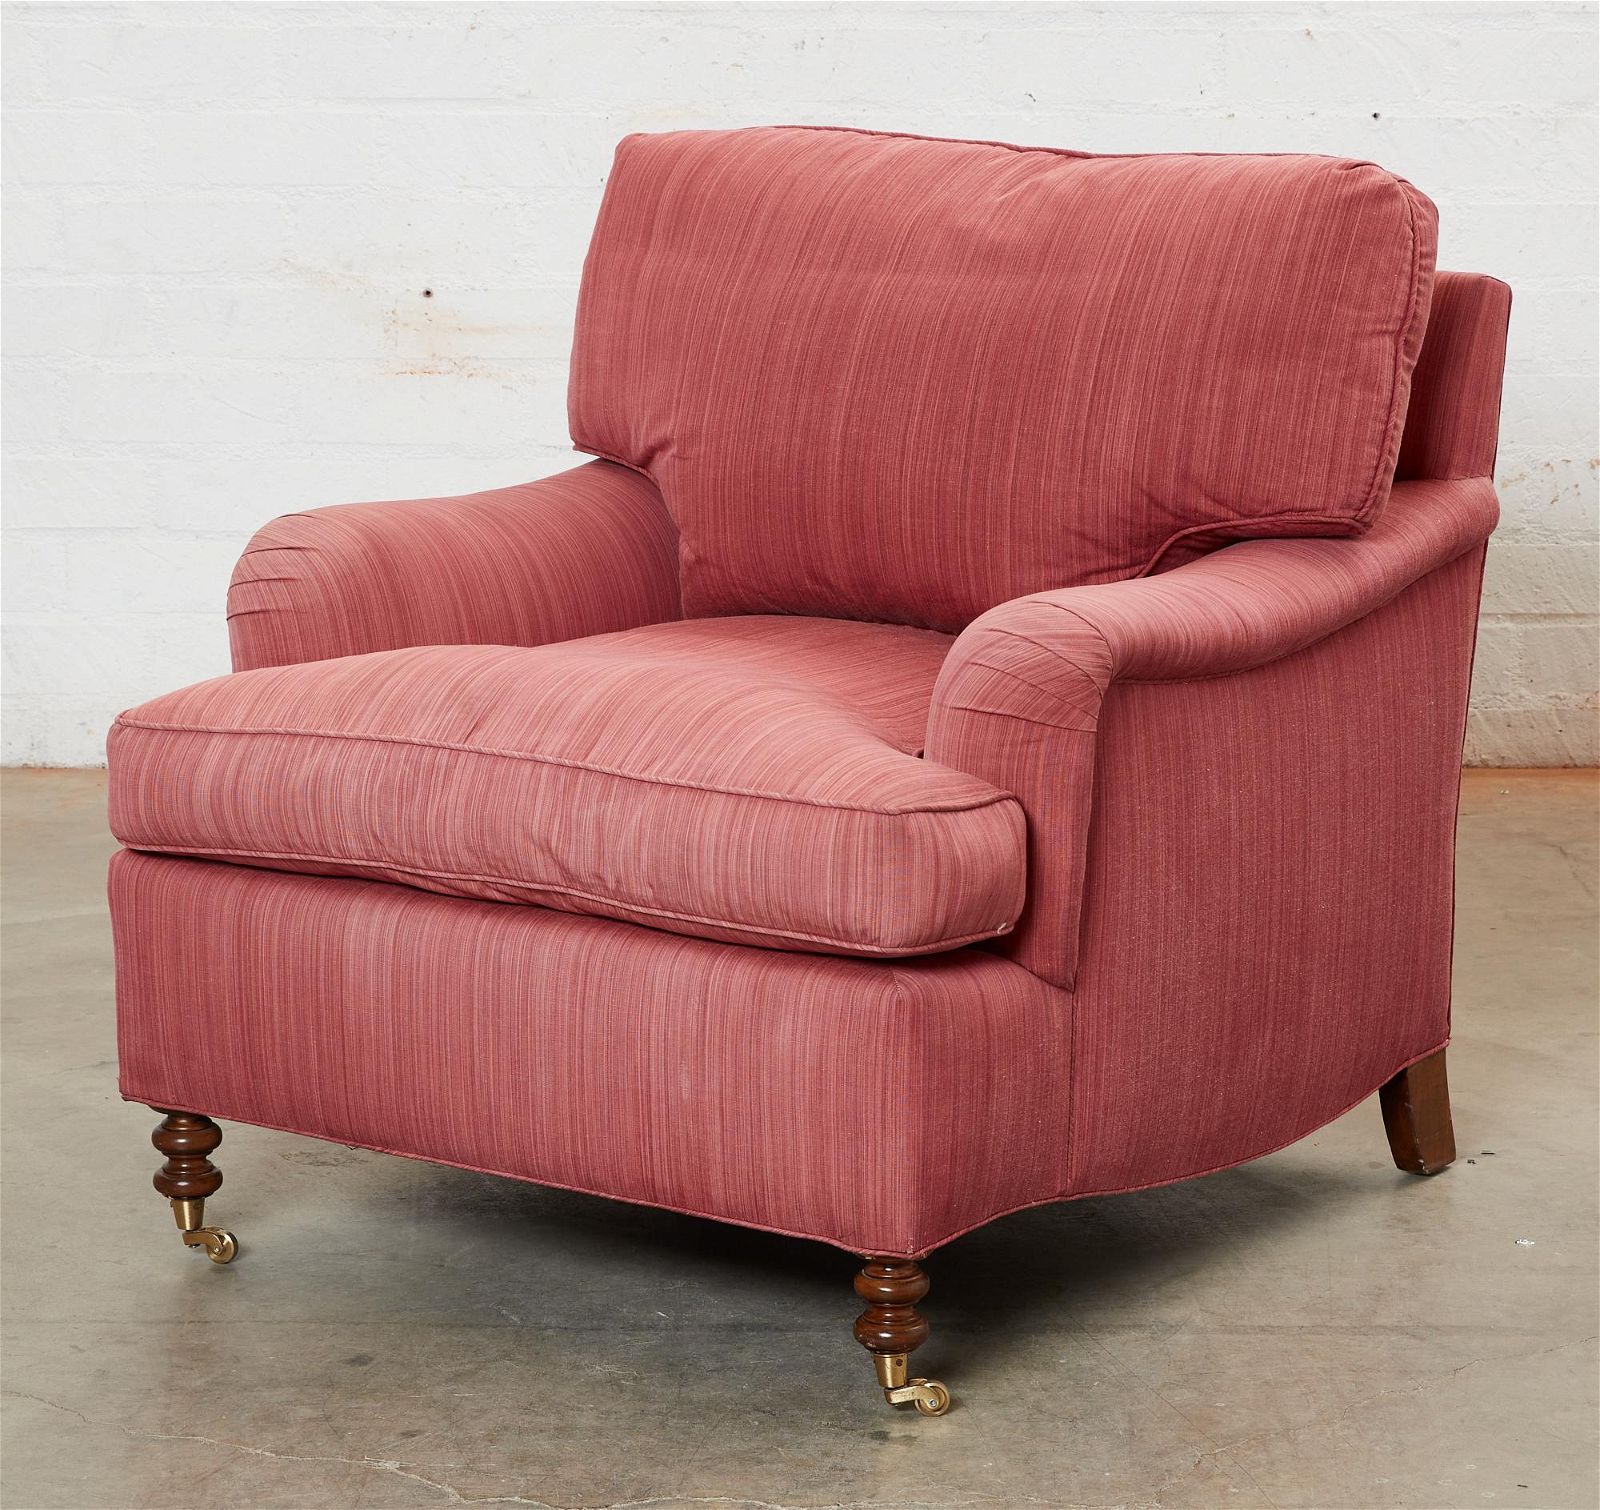 A PINK SATIN UPHOLSTERED CLUB ARMCHAIRA 2fb280a